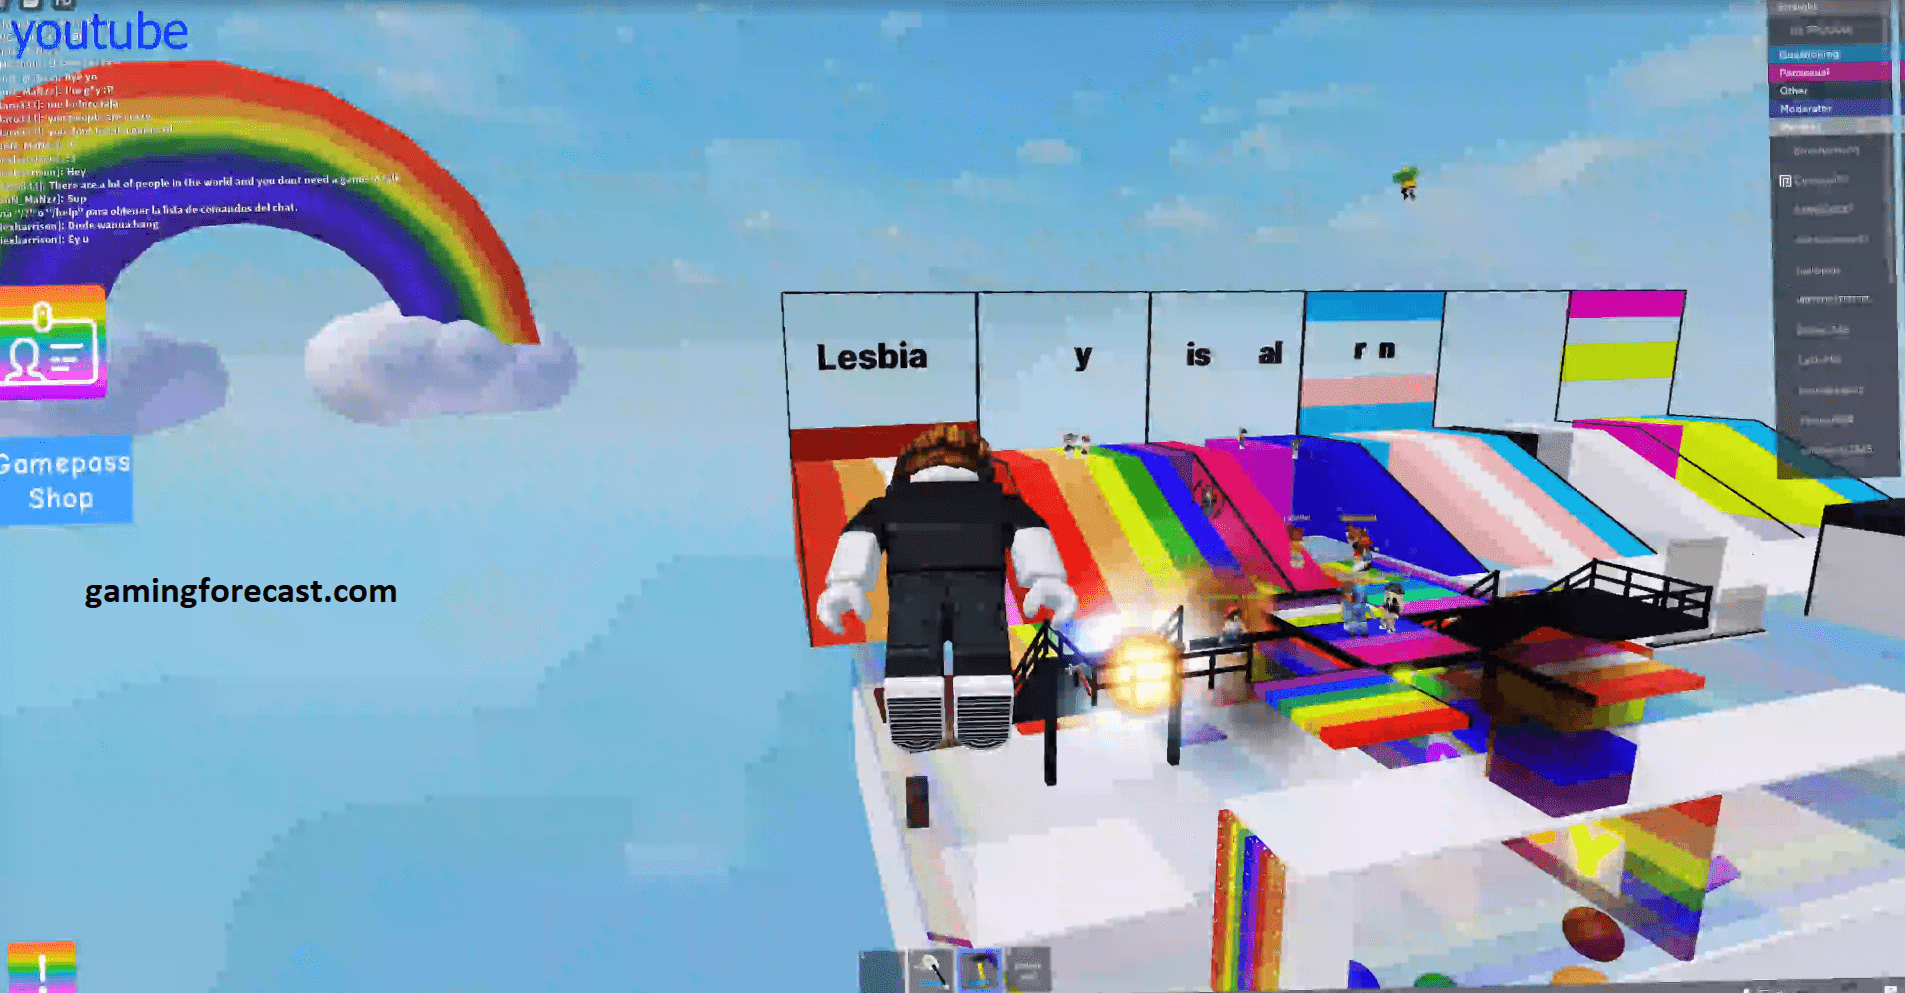 Roblox Hack Download Pc Destroy Lobby Fly Aimbot Scripts 2021 Gaming Forecast Download Free Online Game Hacks - free hacks free roblox hacks